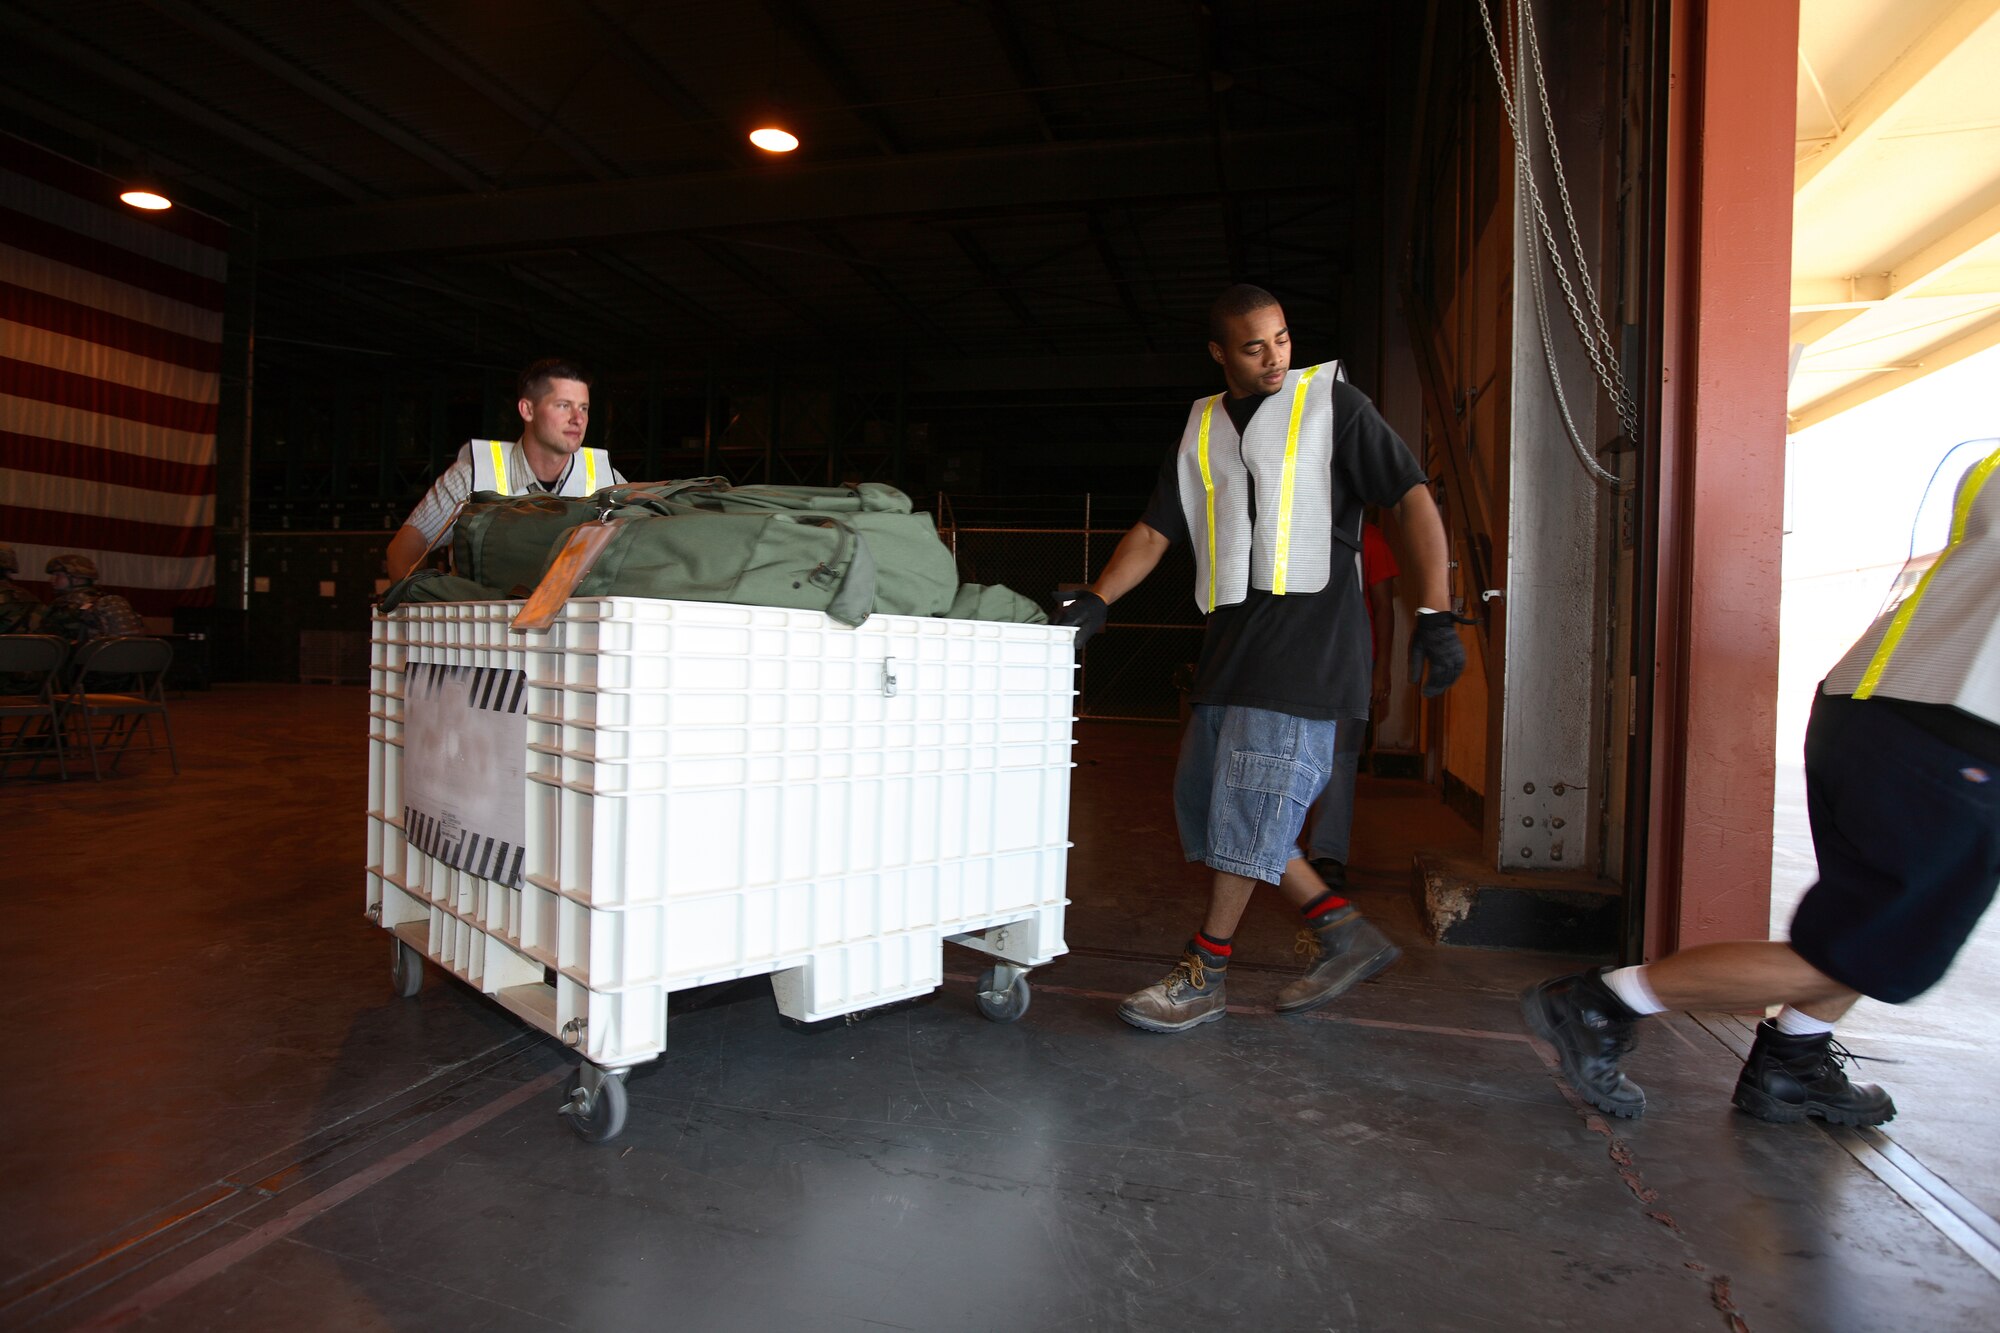 Deployment Operations Division personnel transport cargo during the Phase I exercise July 19. They handle various items used for deployments such as mobility bags, insect repellant, weapons and individual body armor. (Photo by Jet Fabara)